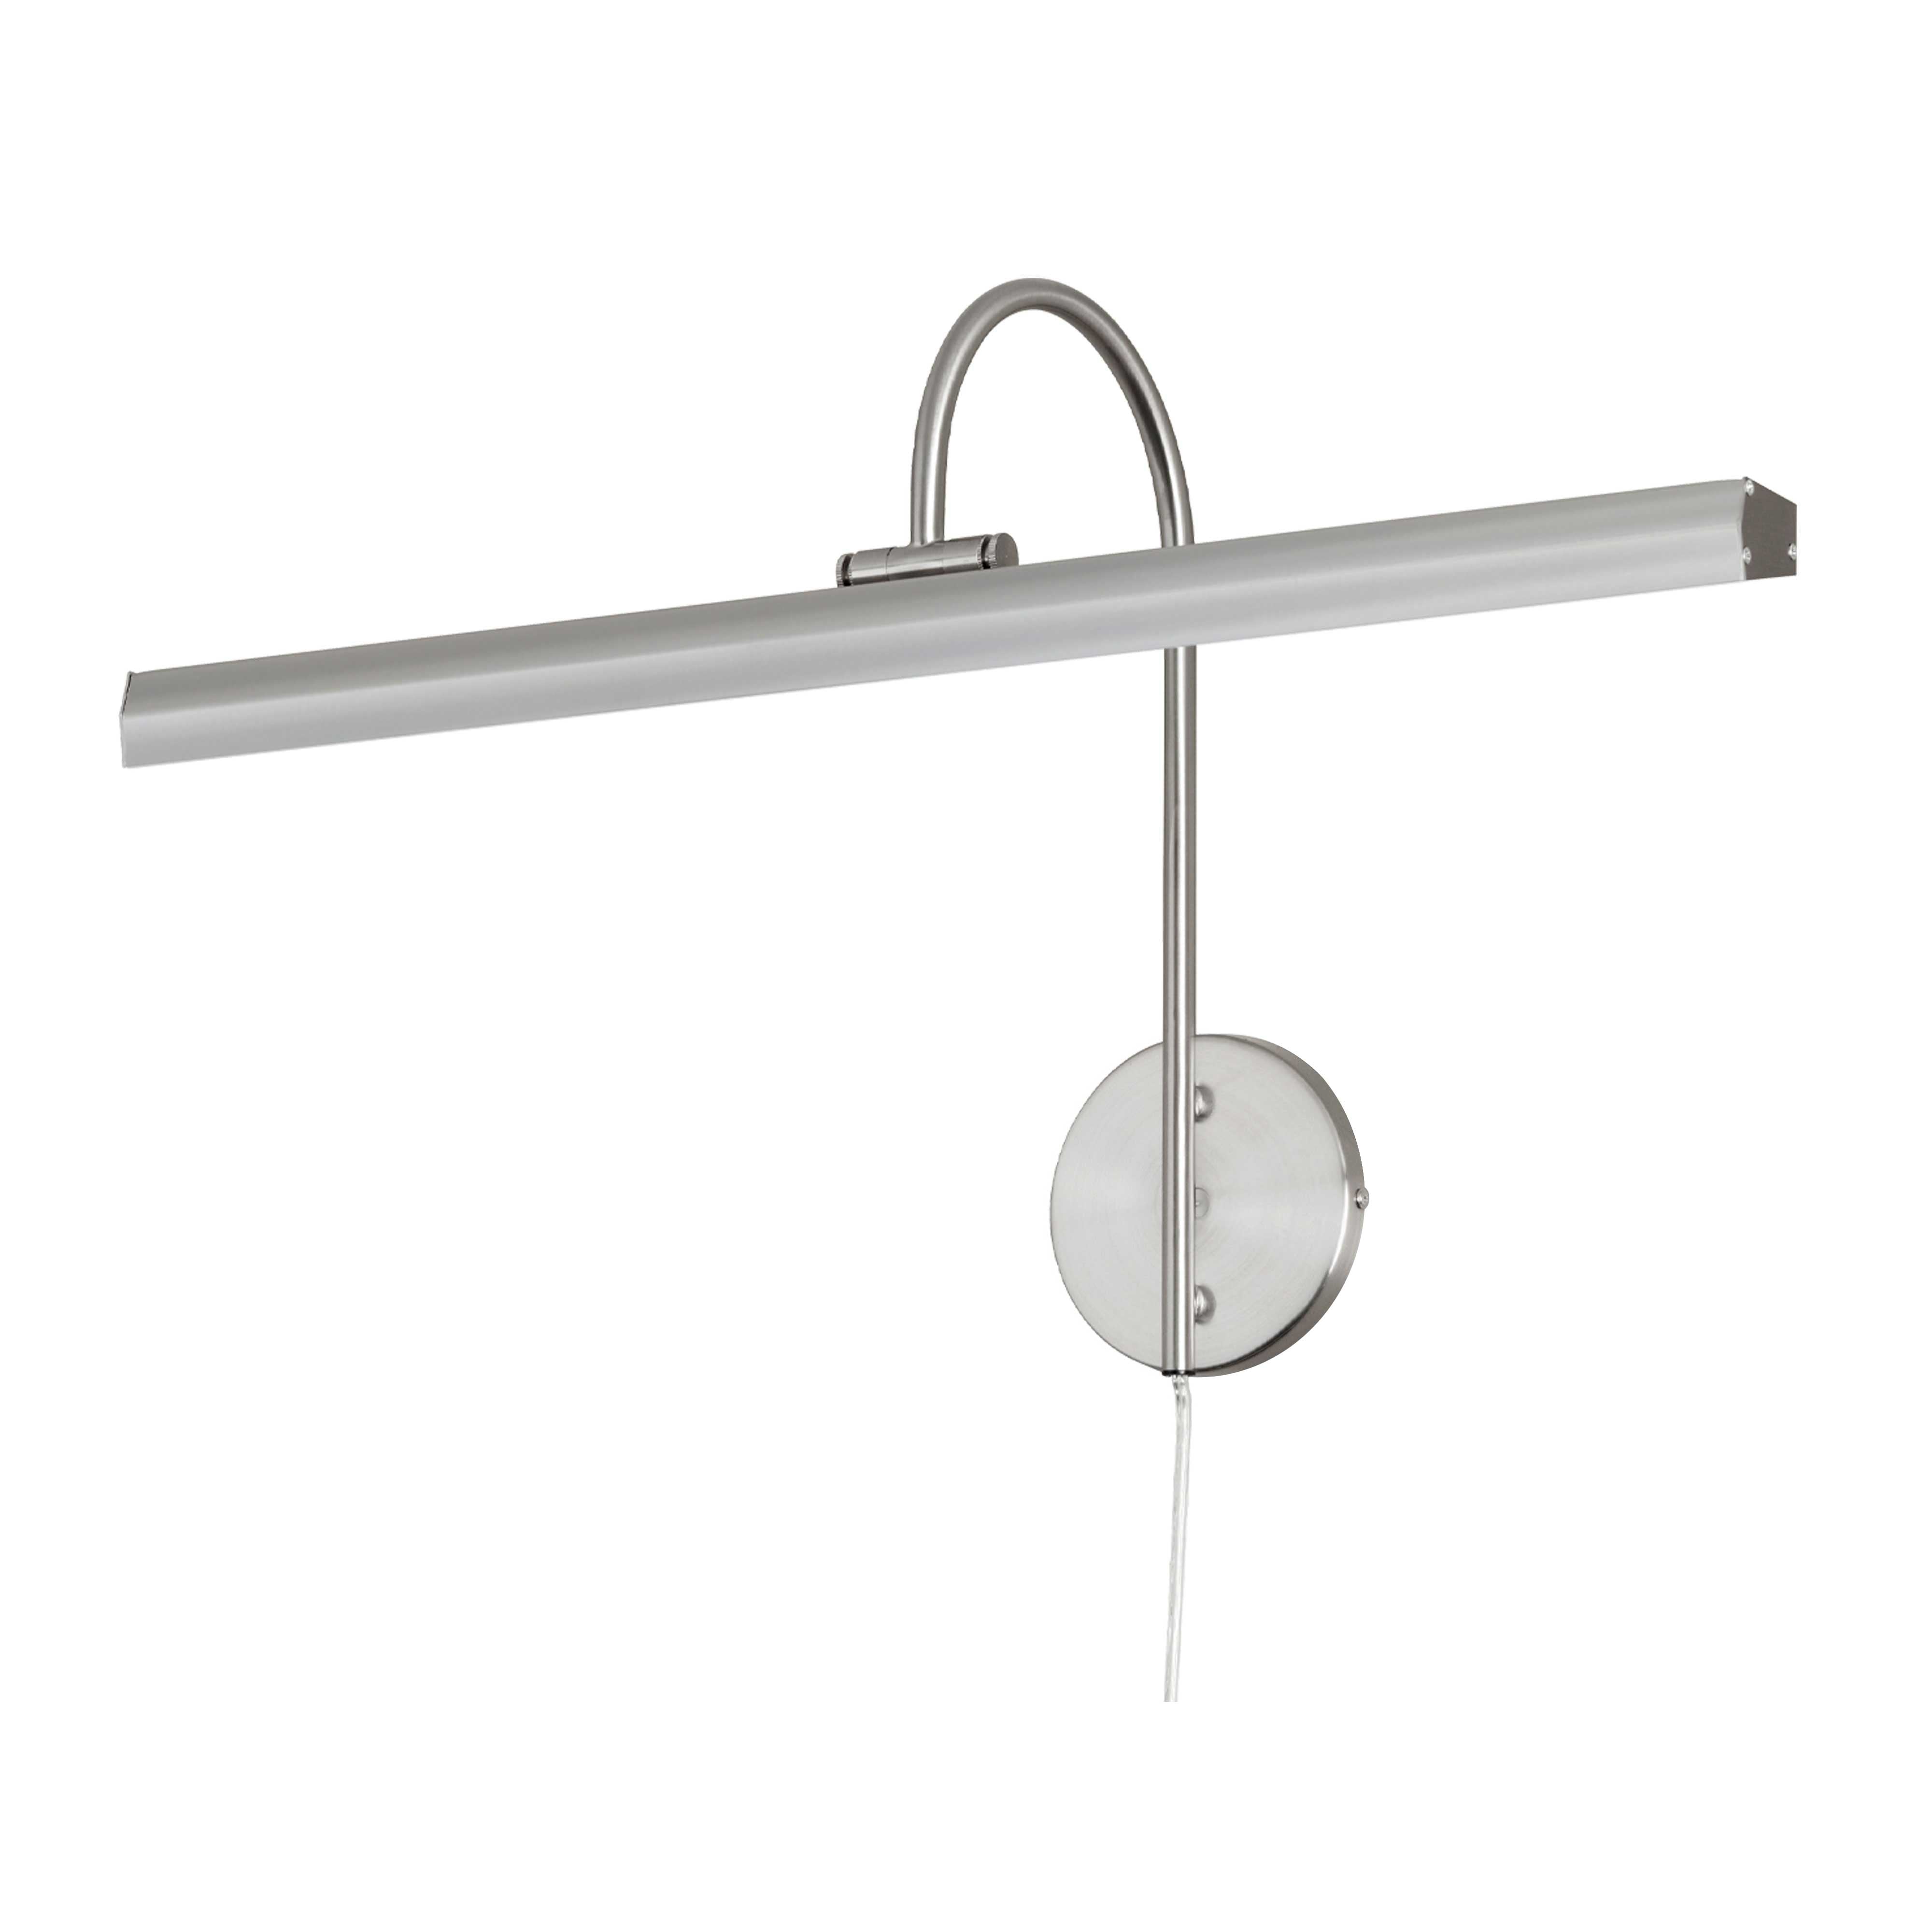 DISPLAY/EXHIBIT Wall sconce à tableau Chrome INTEGRATED LED - PIC120-23LED-SC | DAINOLITE